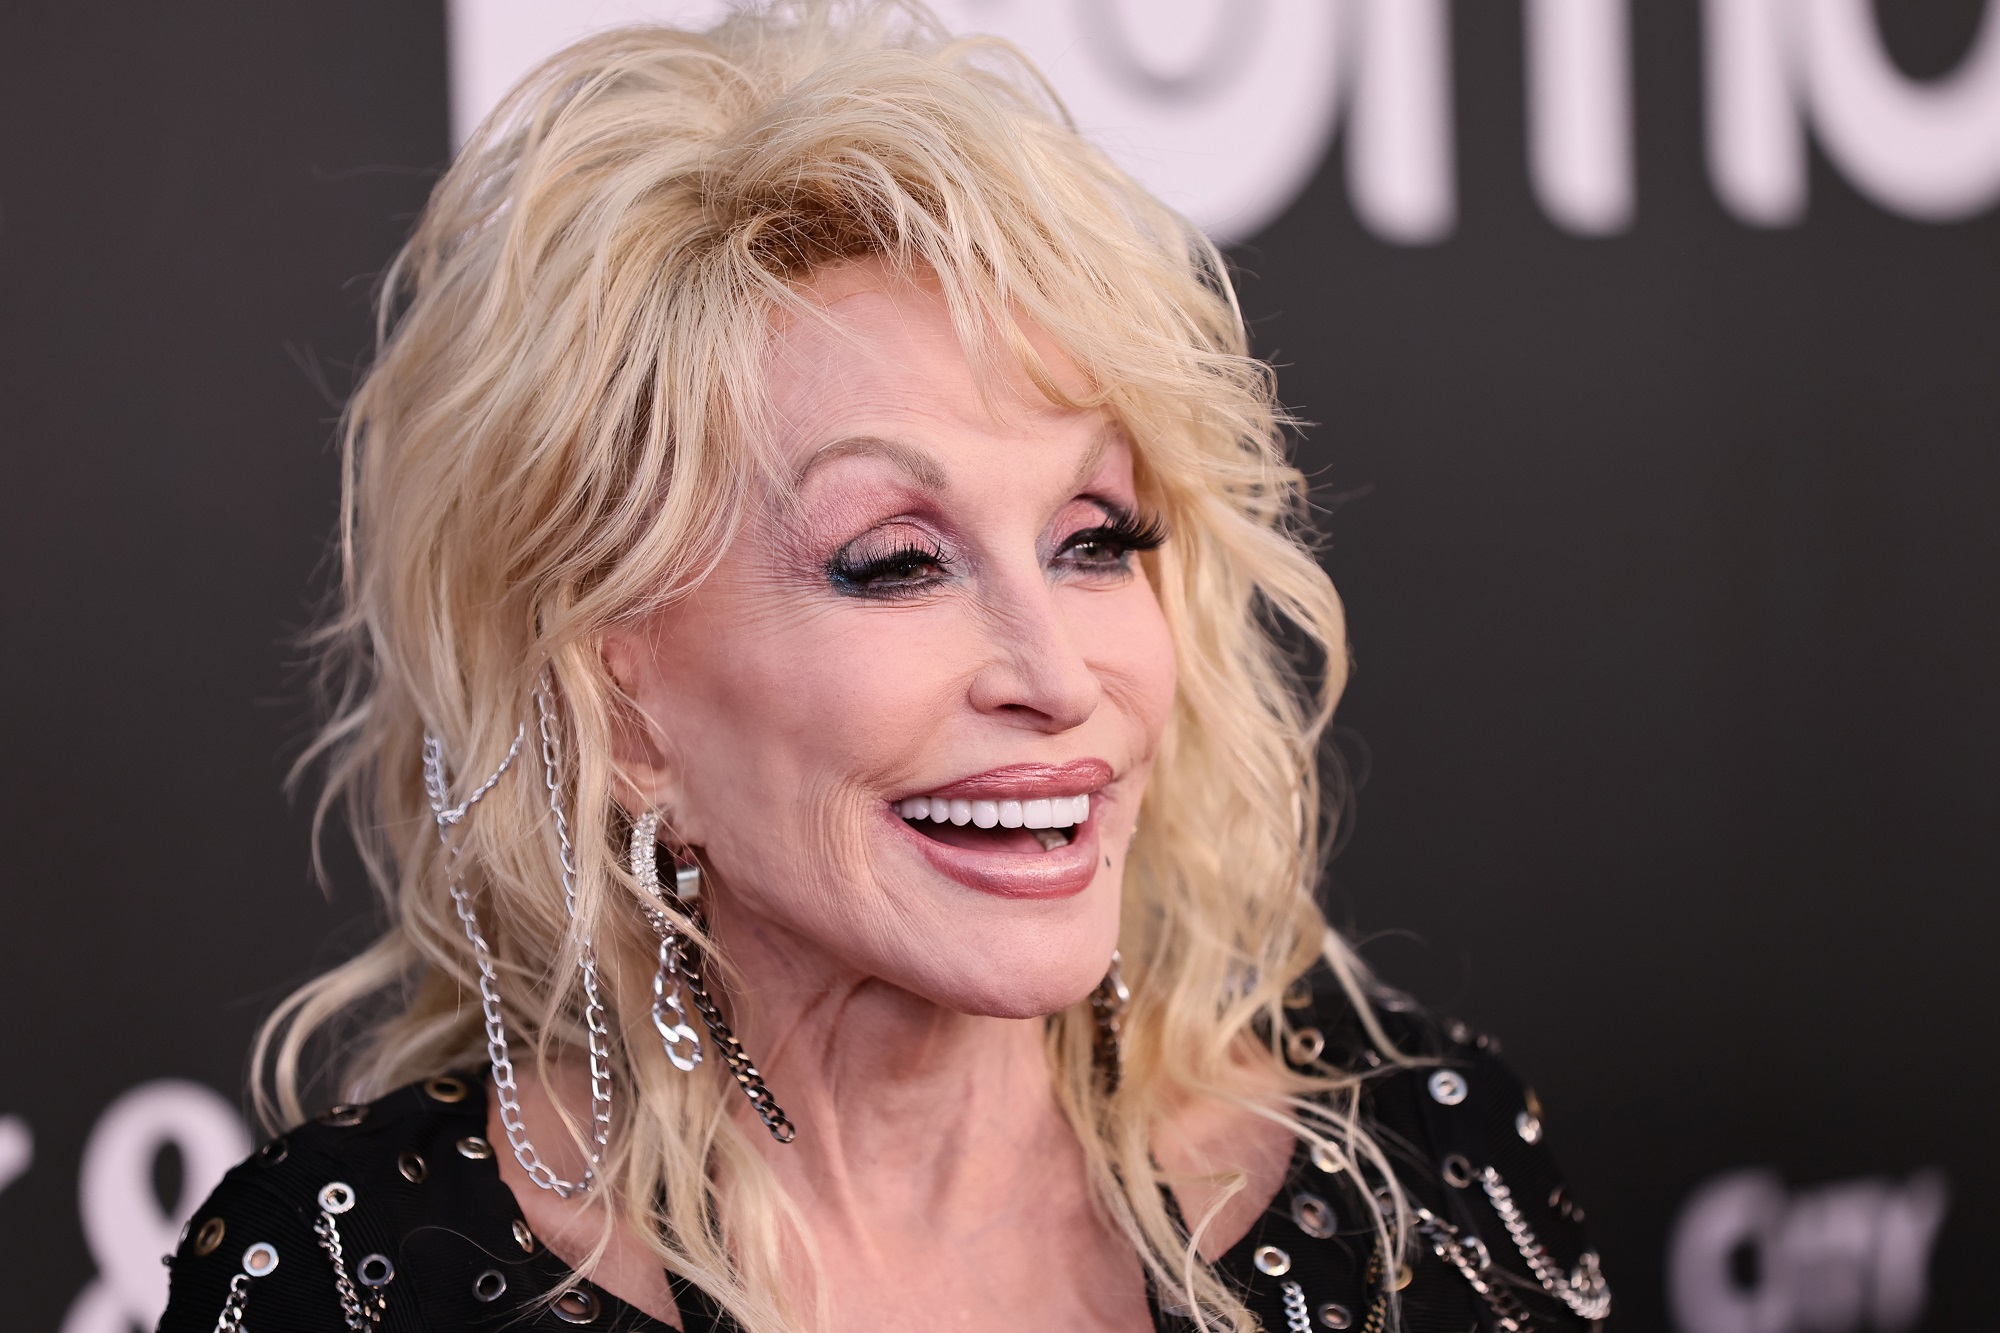 Dolly Parton smiles in front of a black backdrop with white writing